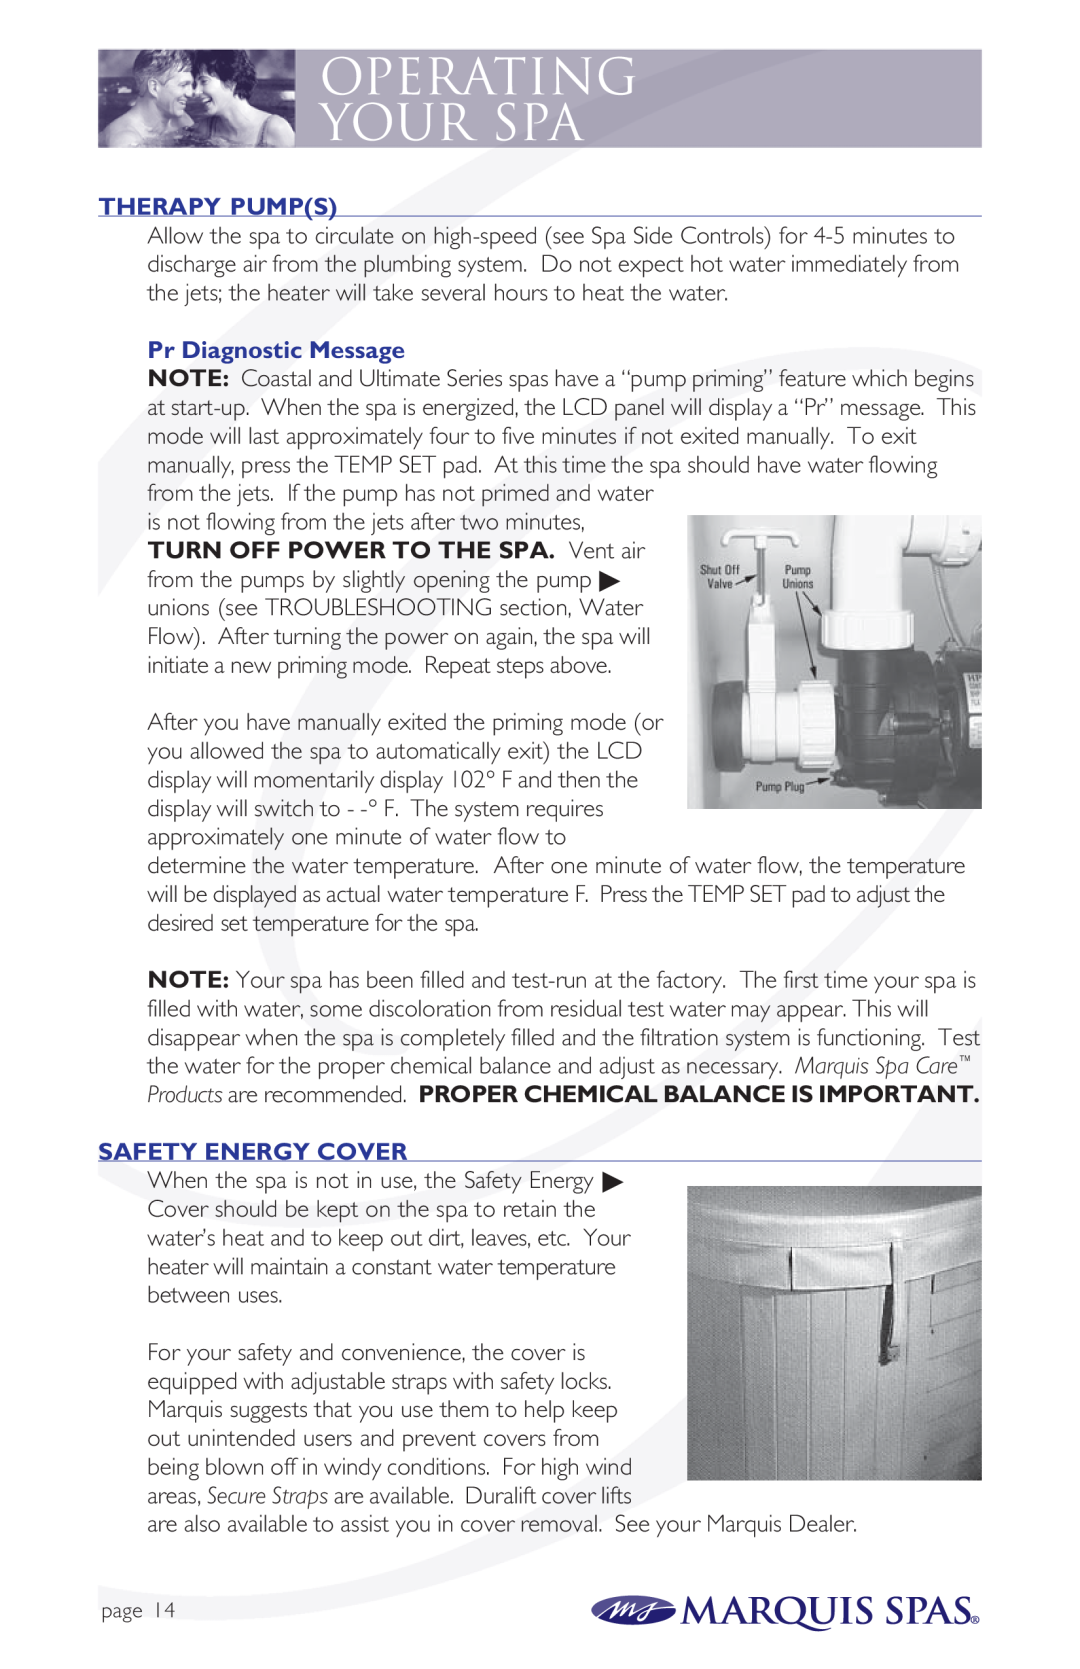 Marquis Spas owner manual Operating Your Spa, Therapy Pumps, Pr Diagnostic Message, Safety Energy Cover 